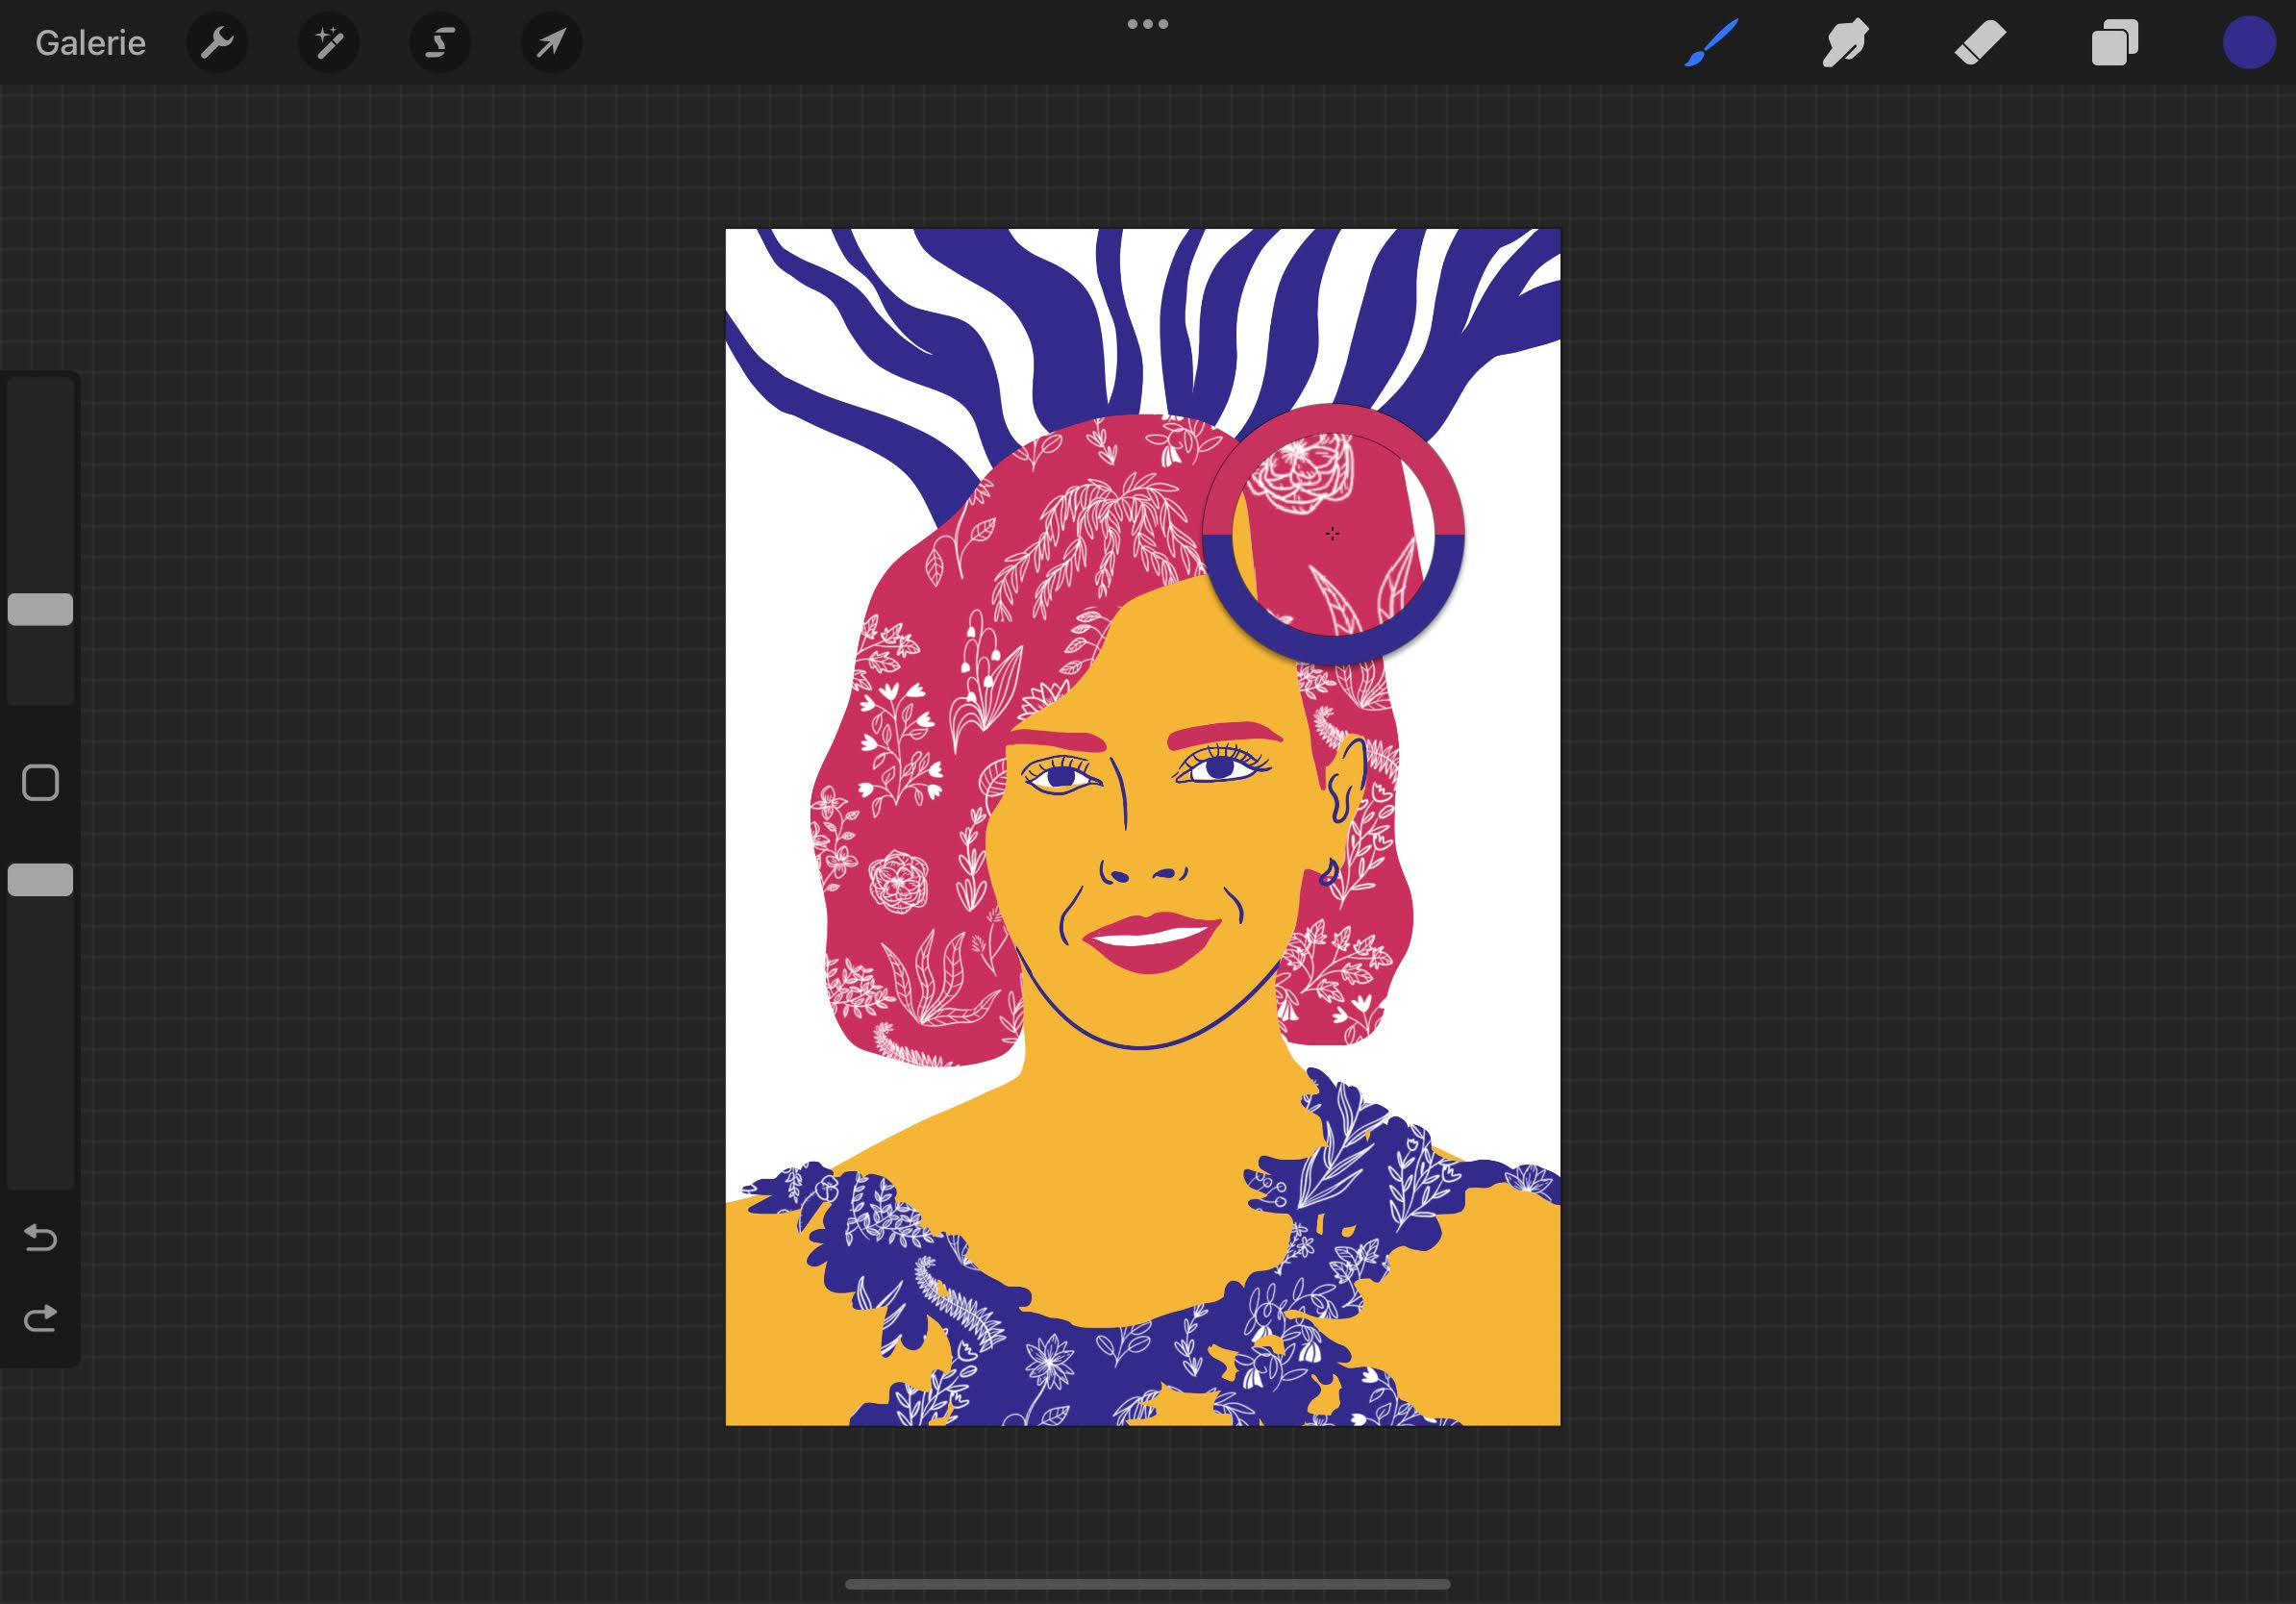 How to use the eyedropper in Procreate?